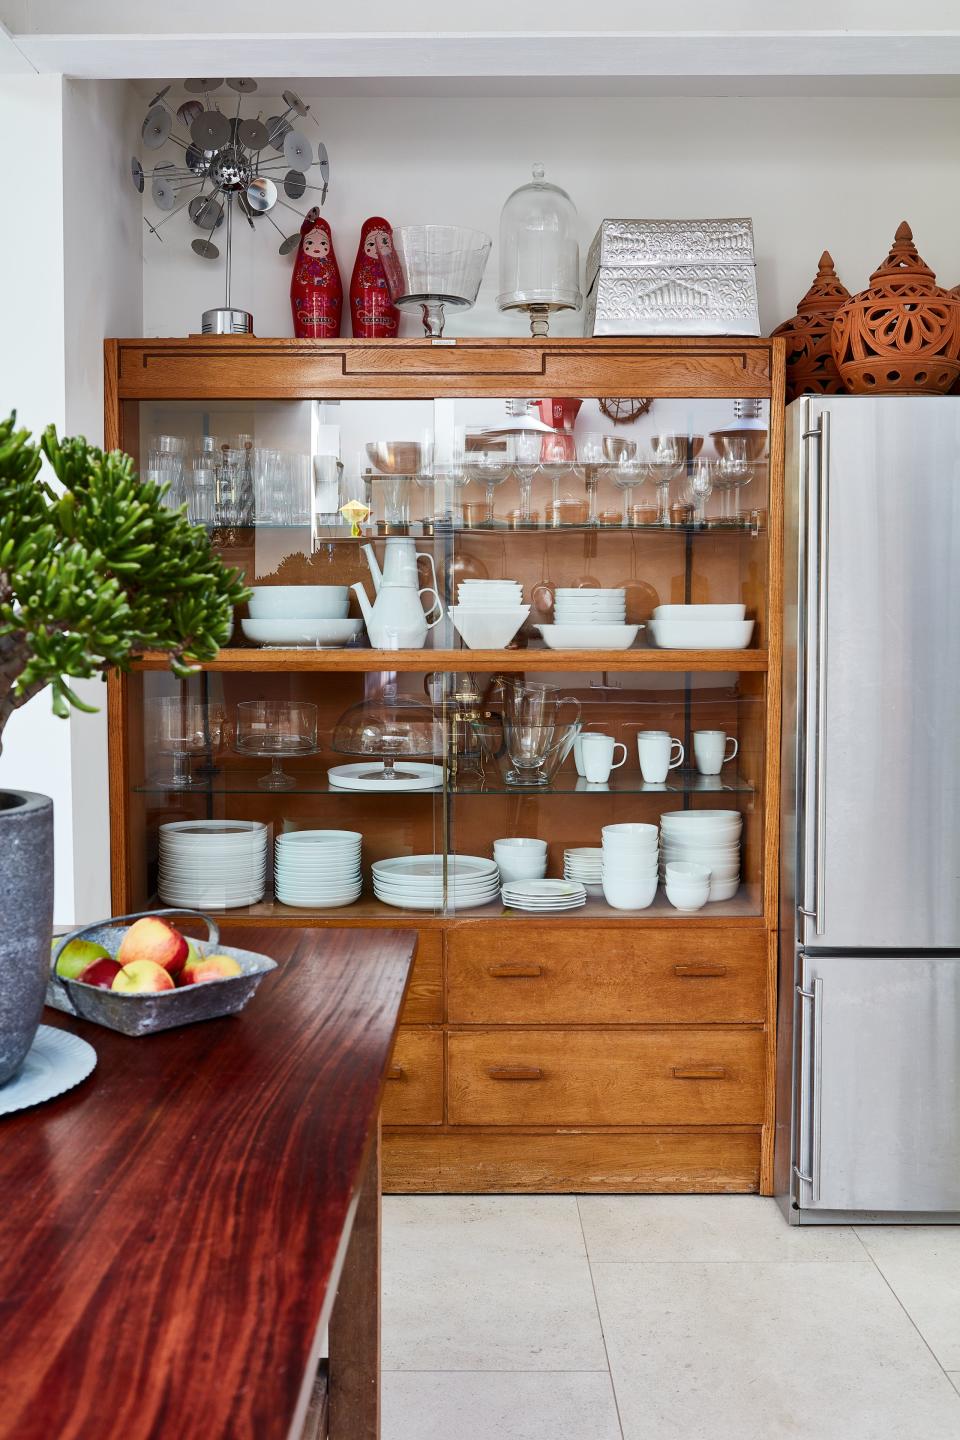 <p> When you are looking for kitchen storage ideas, don&apos;t forget that many great storage options are not kitchen specific &#x2013; some solutions look equally at home in a dining area or living space, making them well suited to open-plan spaces. </p> <p> If you&apos;re designing a vintage kitchen or a homely traditional kitchen, it doesn&#x2019;t get much better than a characterful kitchen sideboard to accommodate stacks of plates, glassware, and table linens.&#xA0; </p> <p> Sideboards were popular in Mid-century interiors too and become fashionable again, so you can find some great second-hand versions in charity shops or at auctions. </p>